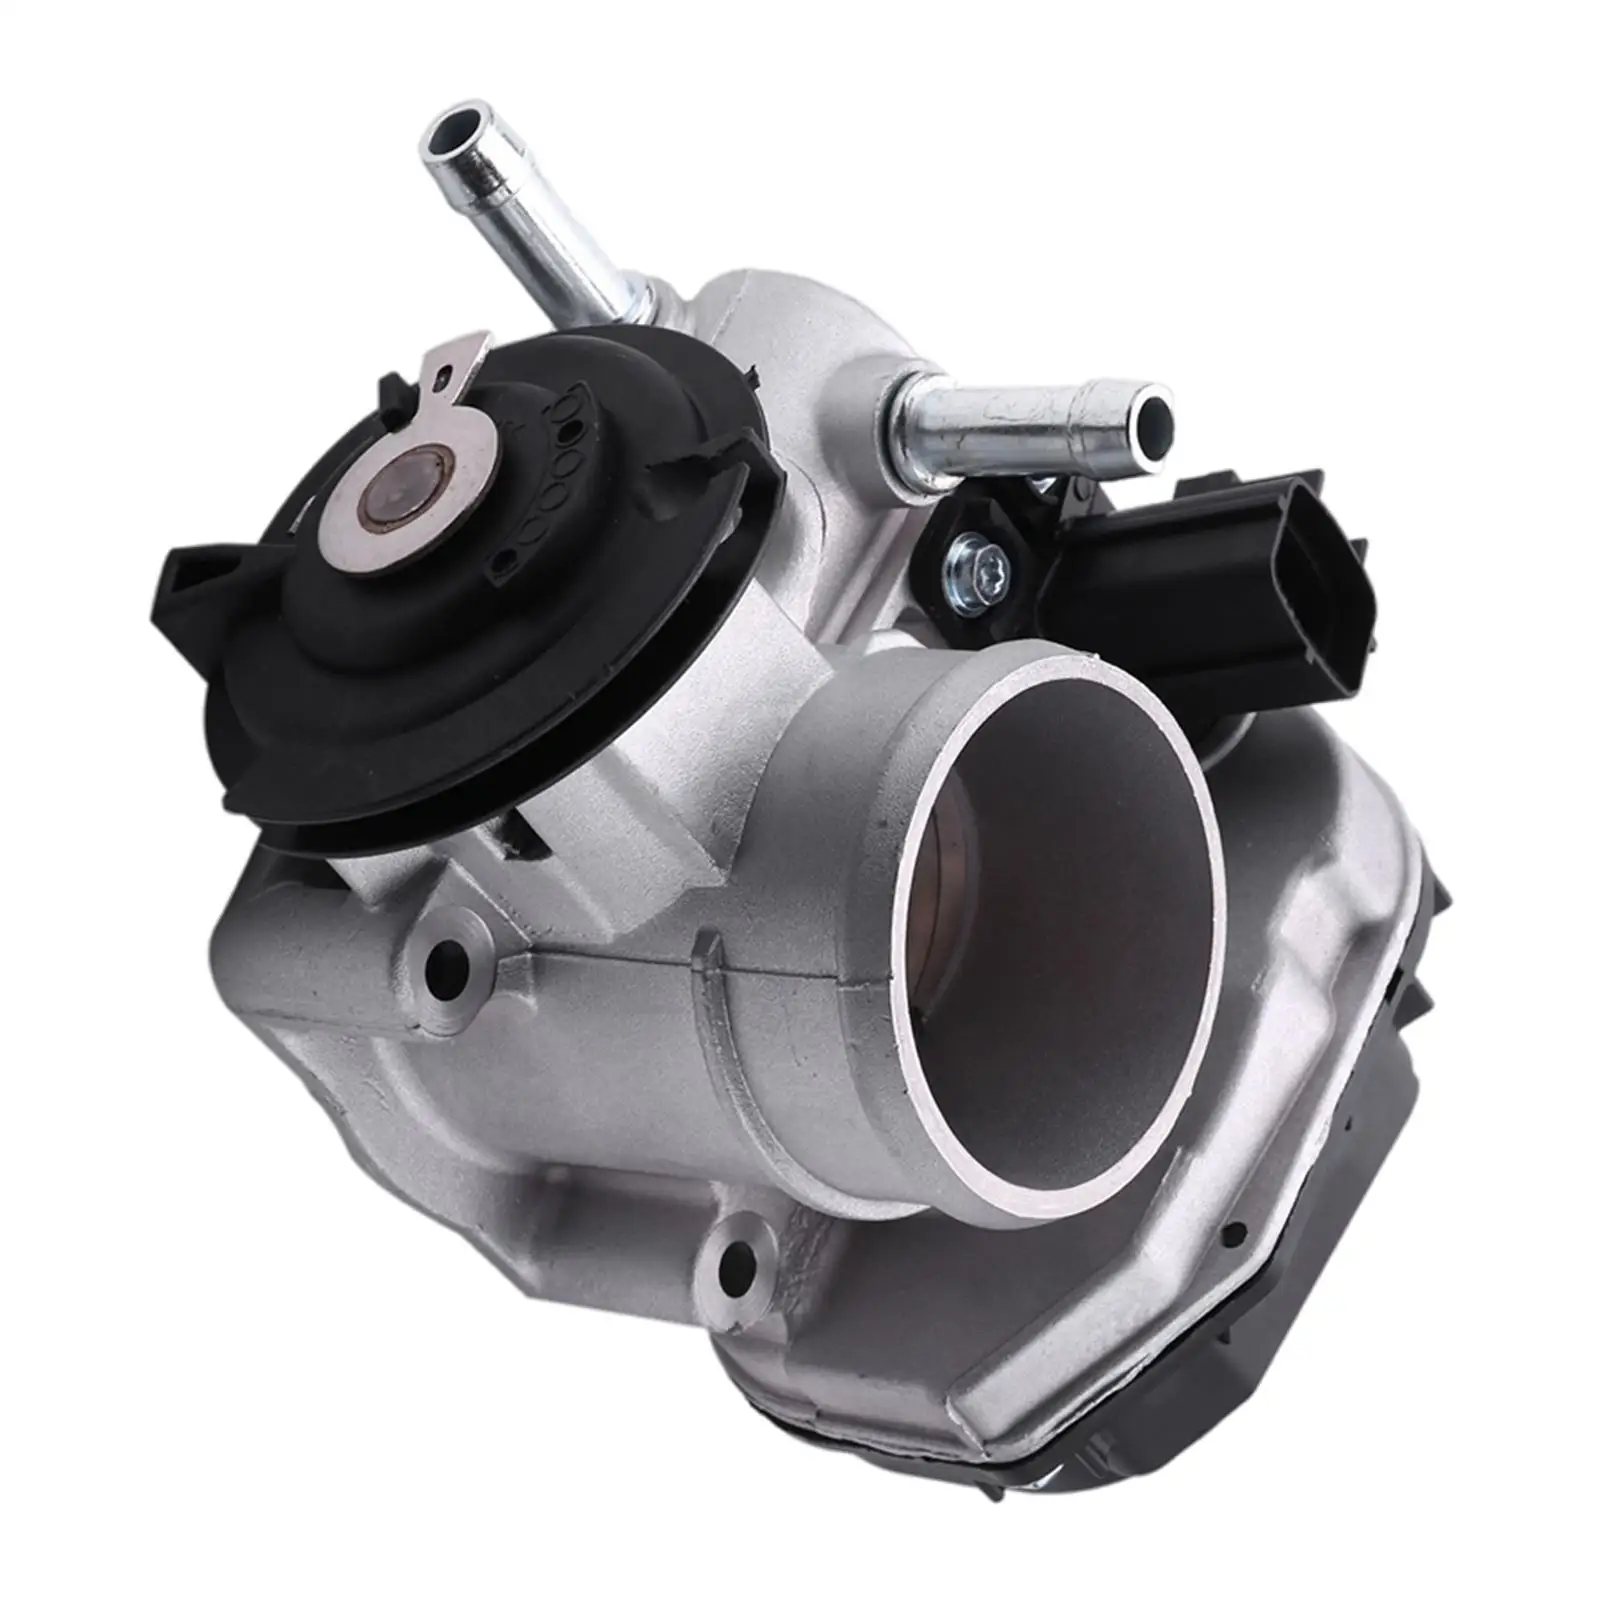 

Throttle Body Low Impurity Silver Fuel Injection Fits for Chevrolet 1.4 1.6 Dohc 03-2012 96394330 96815480 Engines Accessories